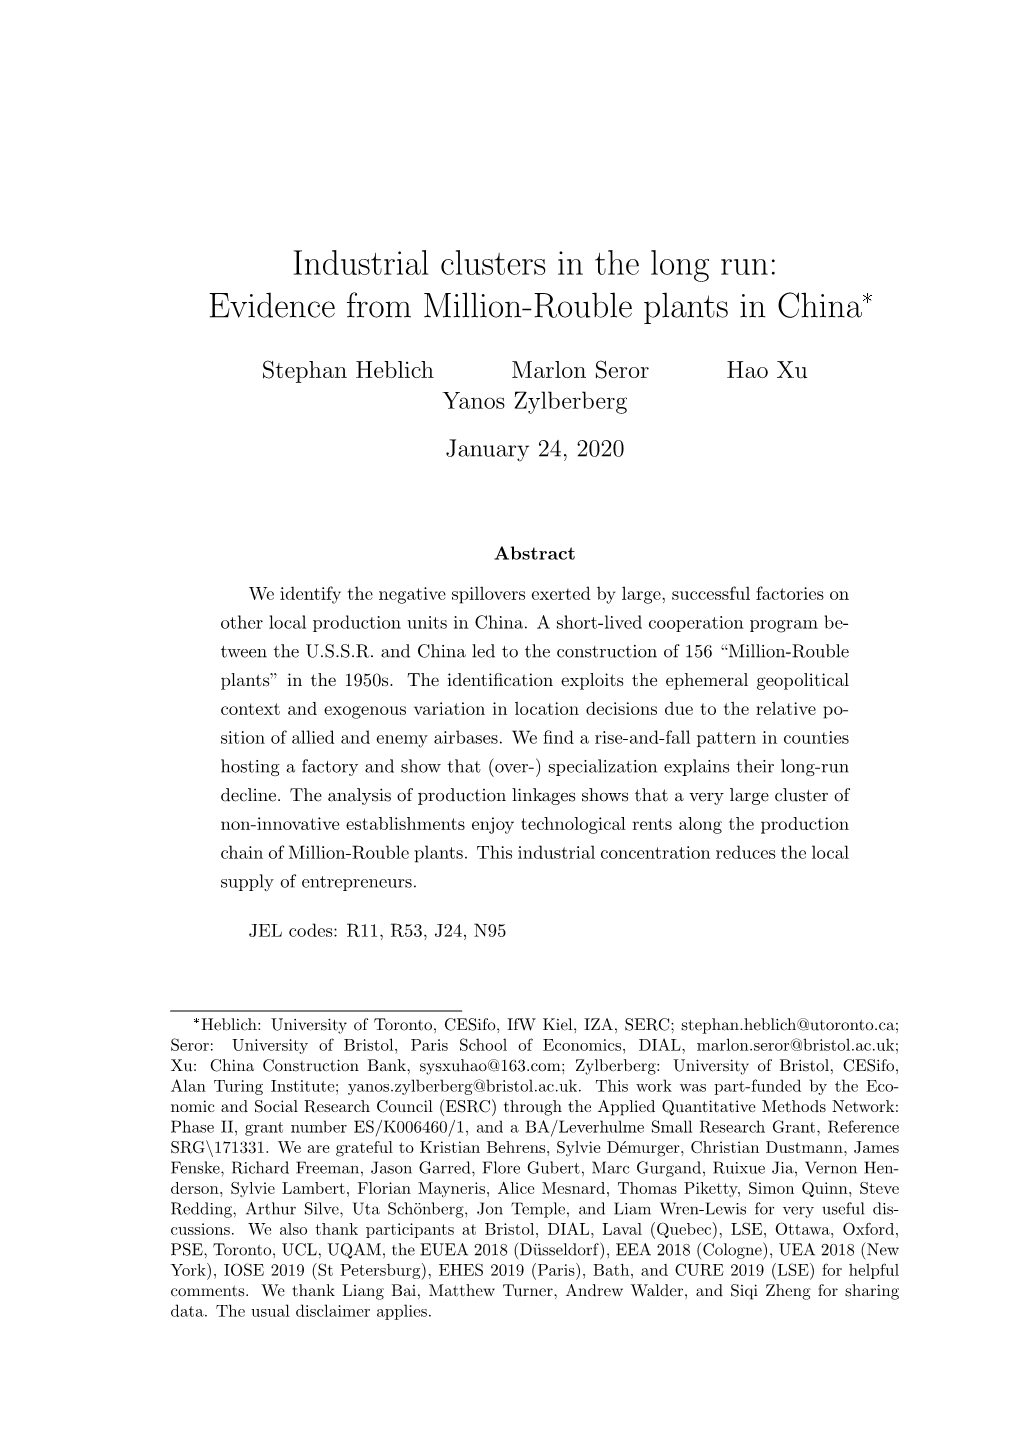 Evidence from Million-Rouble Plants in China*